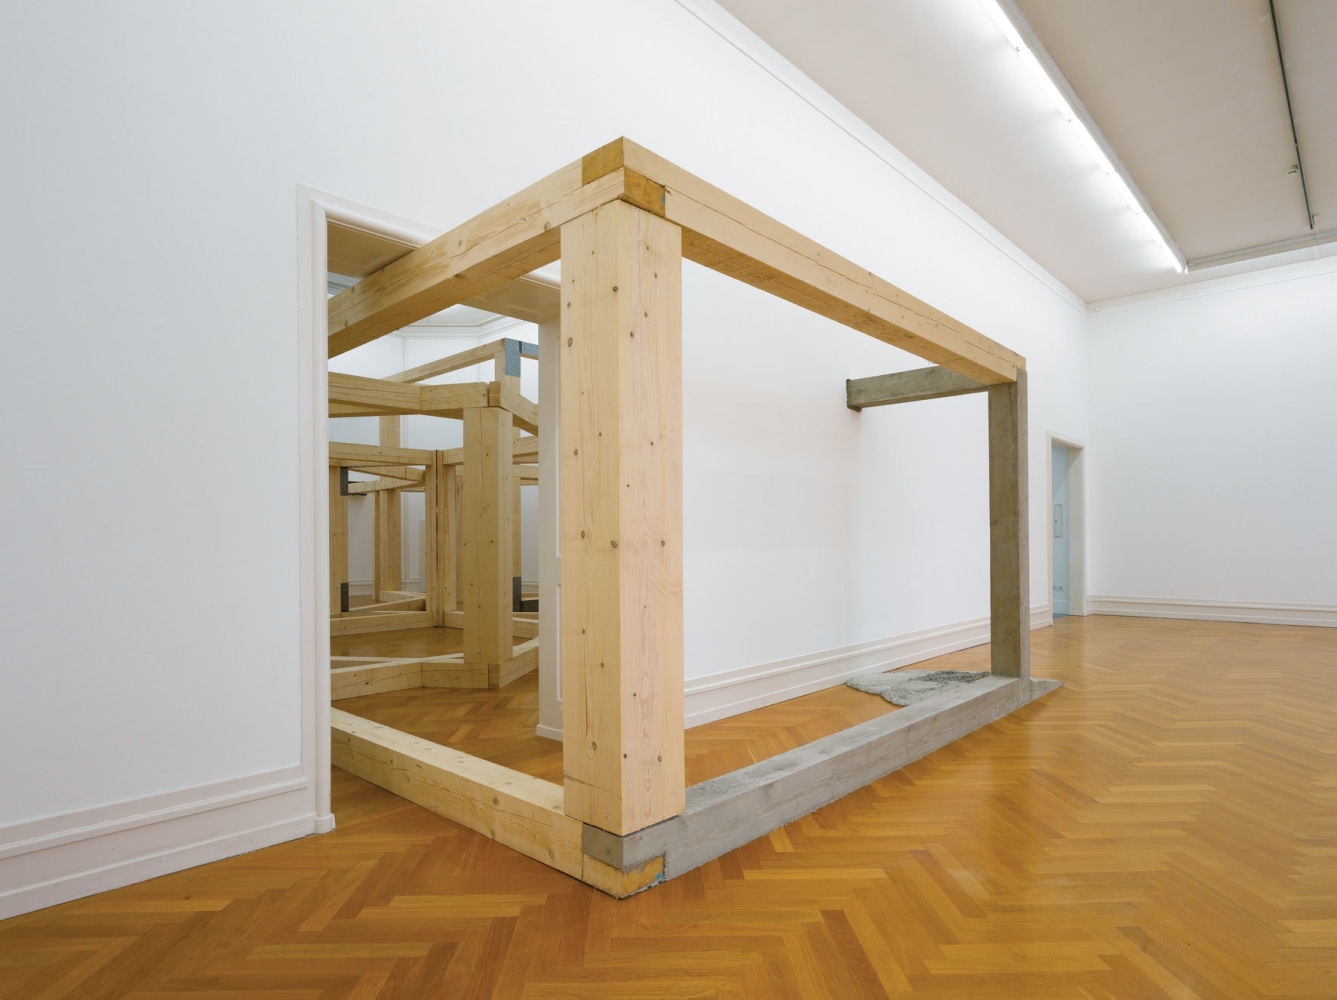 Oscar Tuazon
Untitled, 2010
Pine, steel
Approximately 472 1/2 x 787 2/5 x 177 1/5&amp;nbsp;inches (1200 x 2000 x 450&amp;nbsp;cm)
February 13 &amp;ndash; April 25, 2010
Installation view of&amp;nbsp;Oscar Tuazon&amp;nbsp;at Kunsthalle Bern
Photo: Dominique Uldry